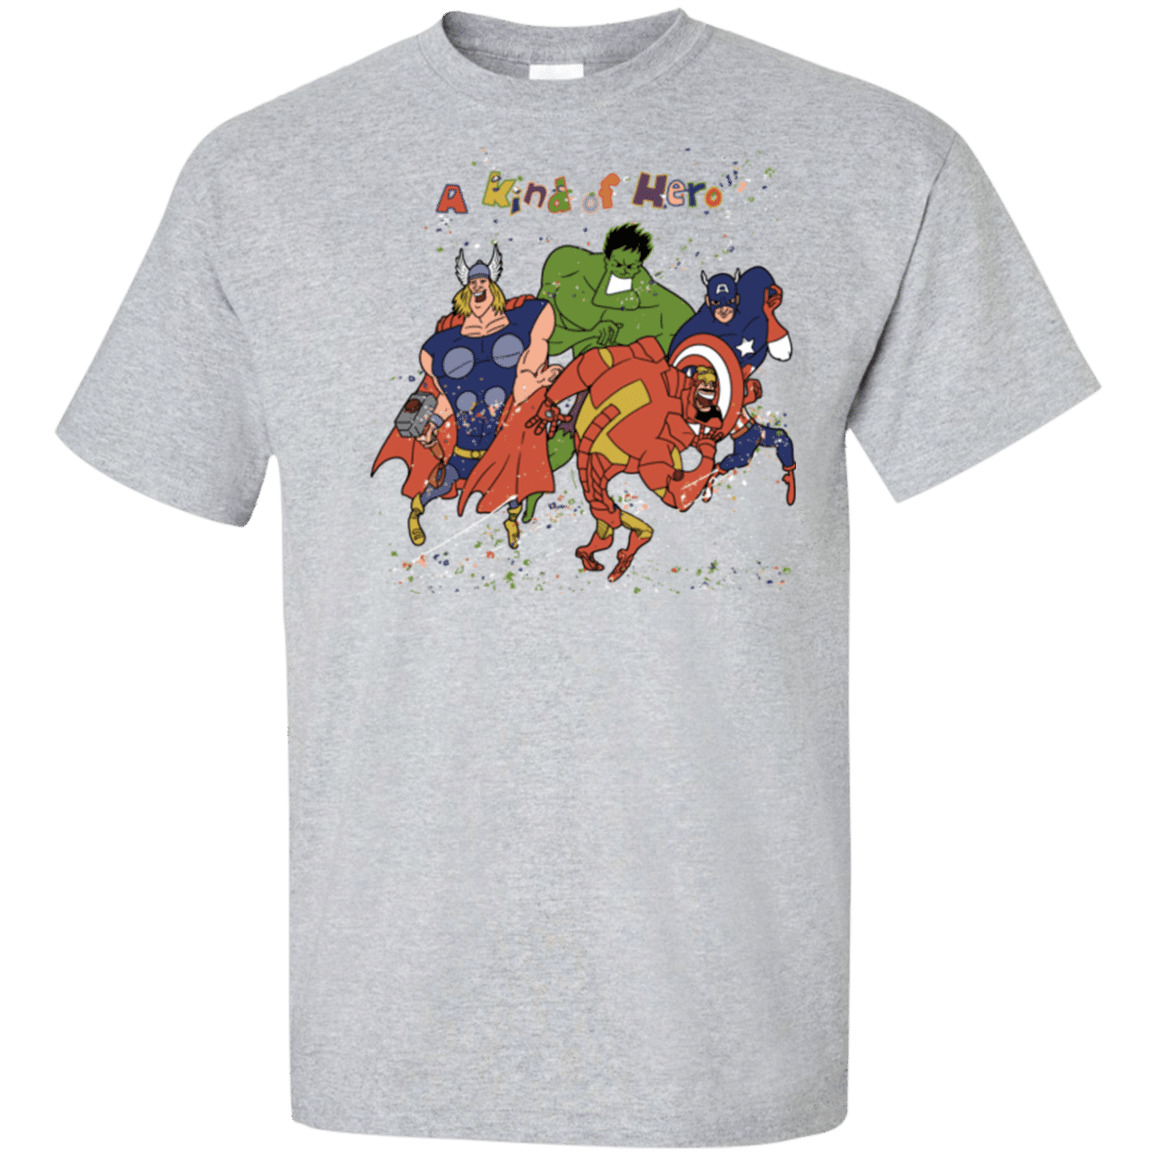 A kind of heroes Tall T-Shirt